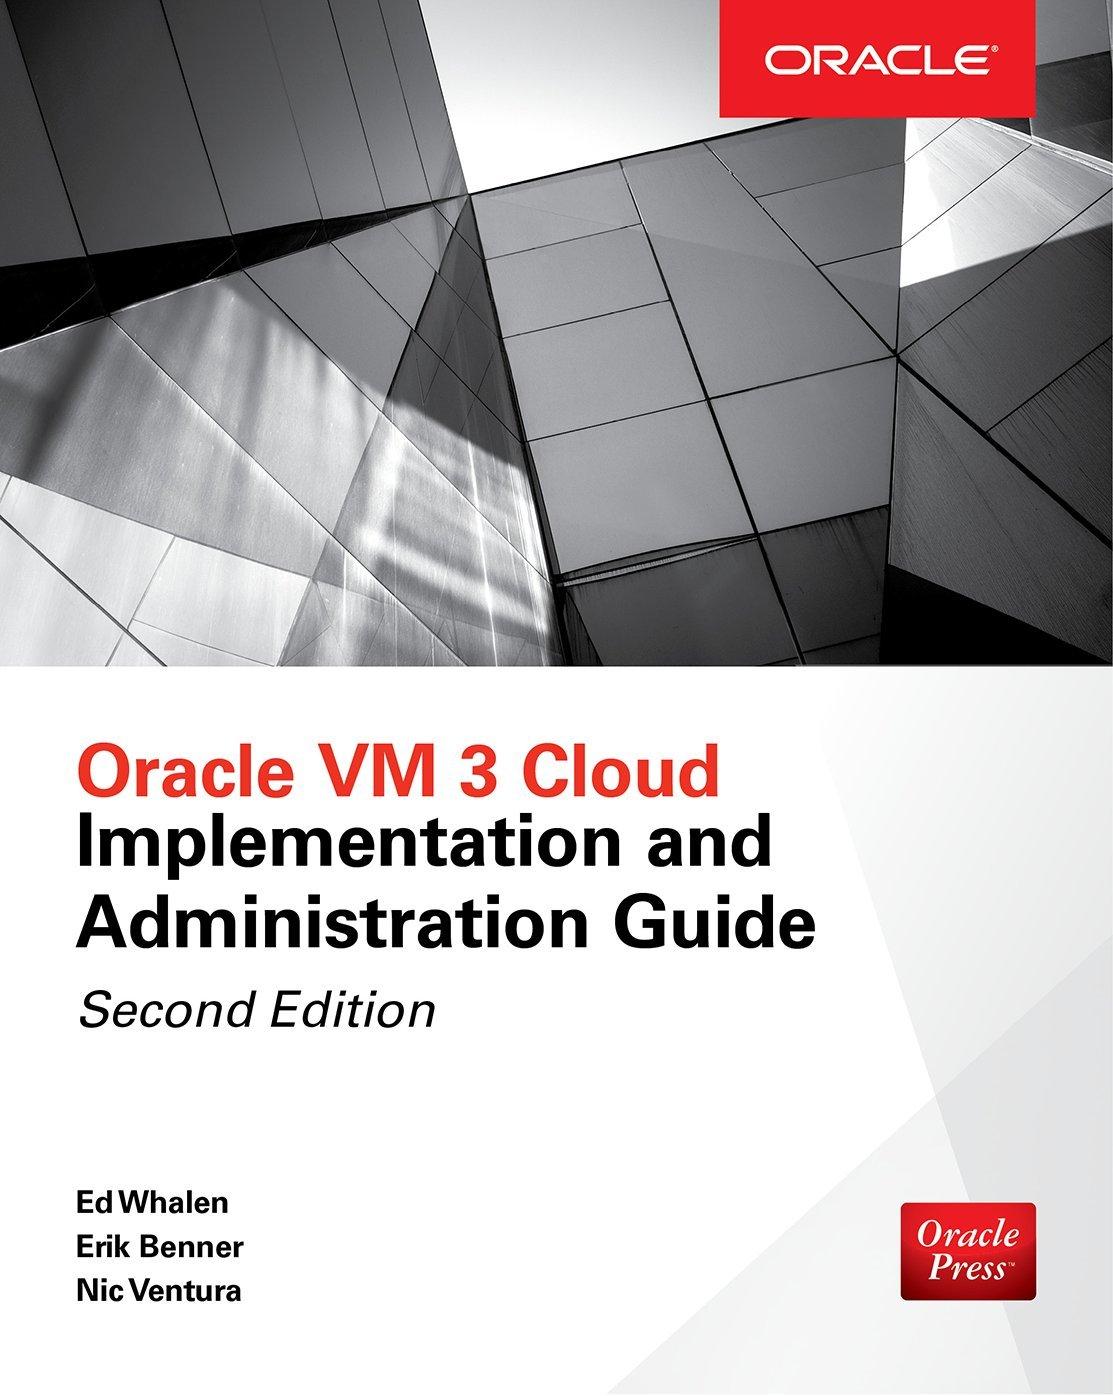 oracle vm 3 cloud implementation and administration guide 2nd edition edward whalen, erik benner, nic ventura